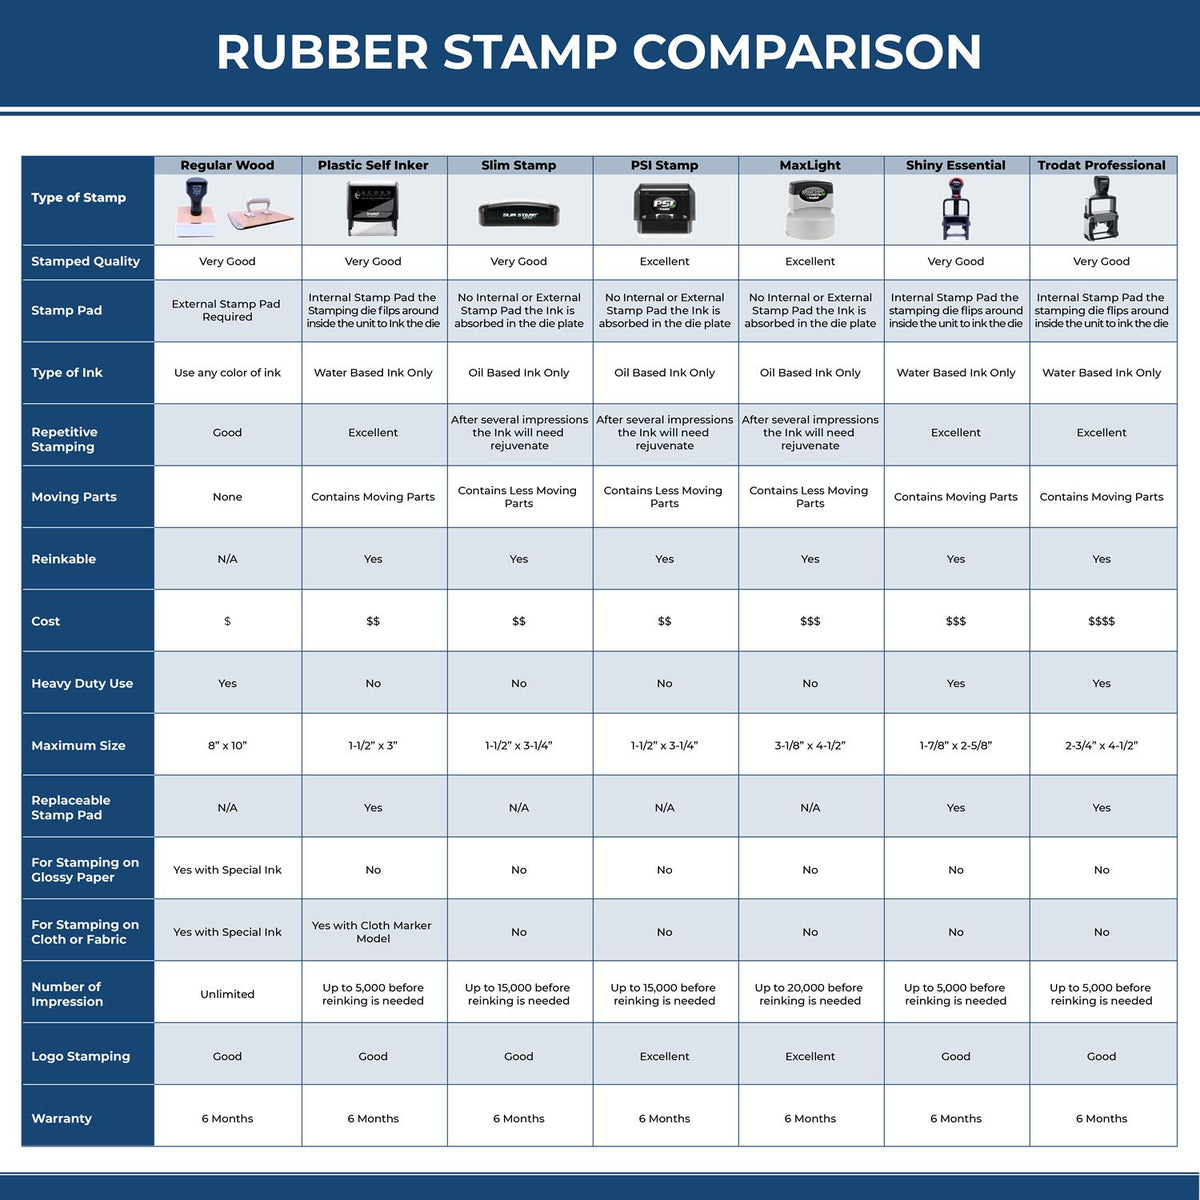 A comparison chart for the different types of mount models available for the Wooden Handle Texas State Seal Notary Public Stamp.